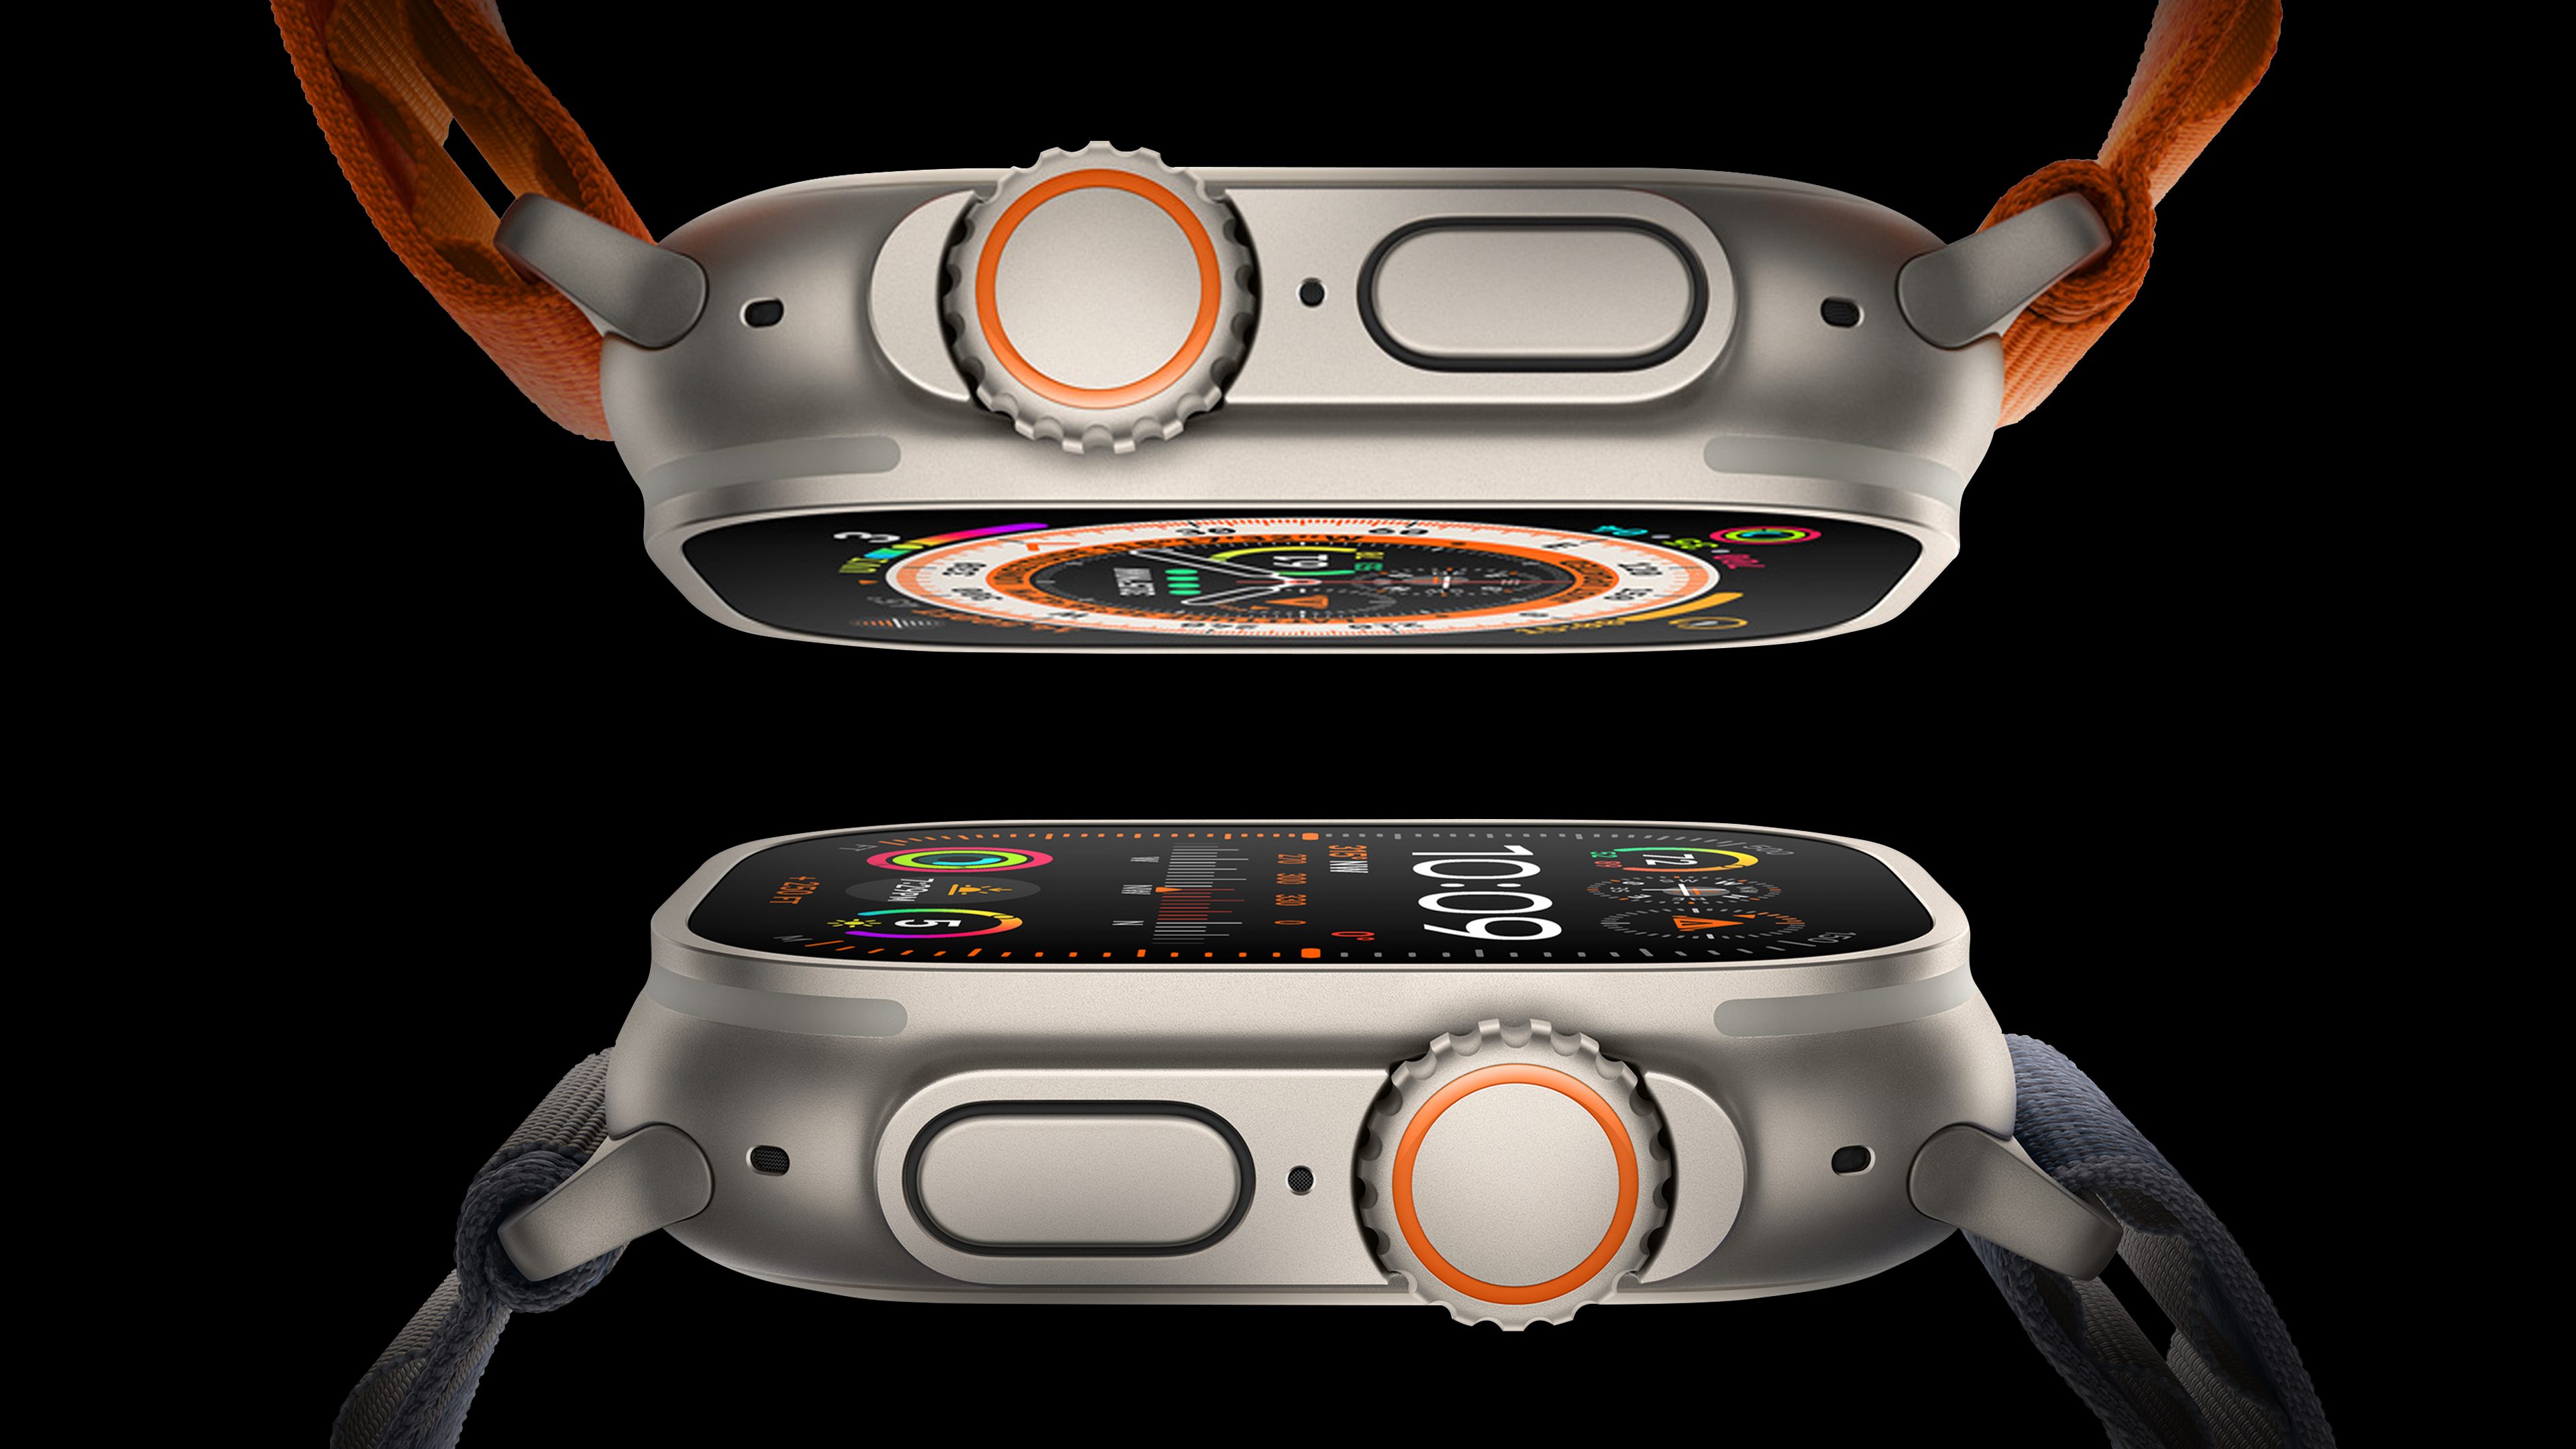 Apple Watch Ultra 1 vs. Ultra 2: More speed and smarter gestures